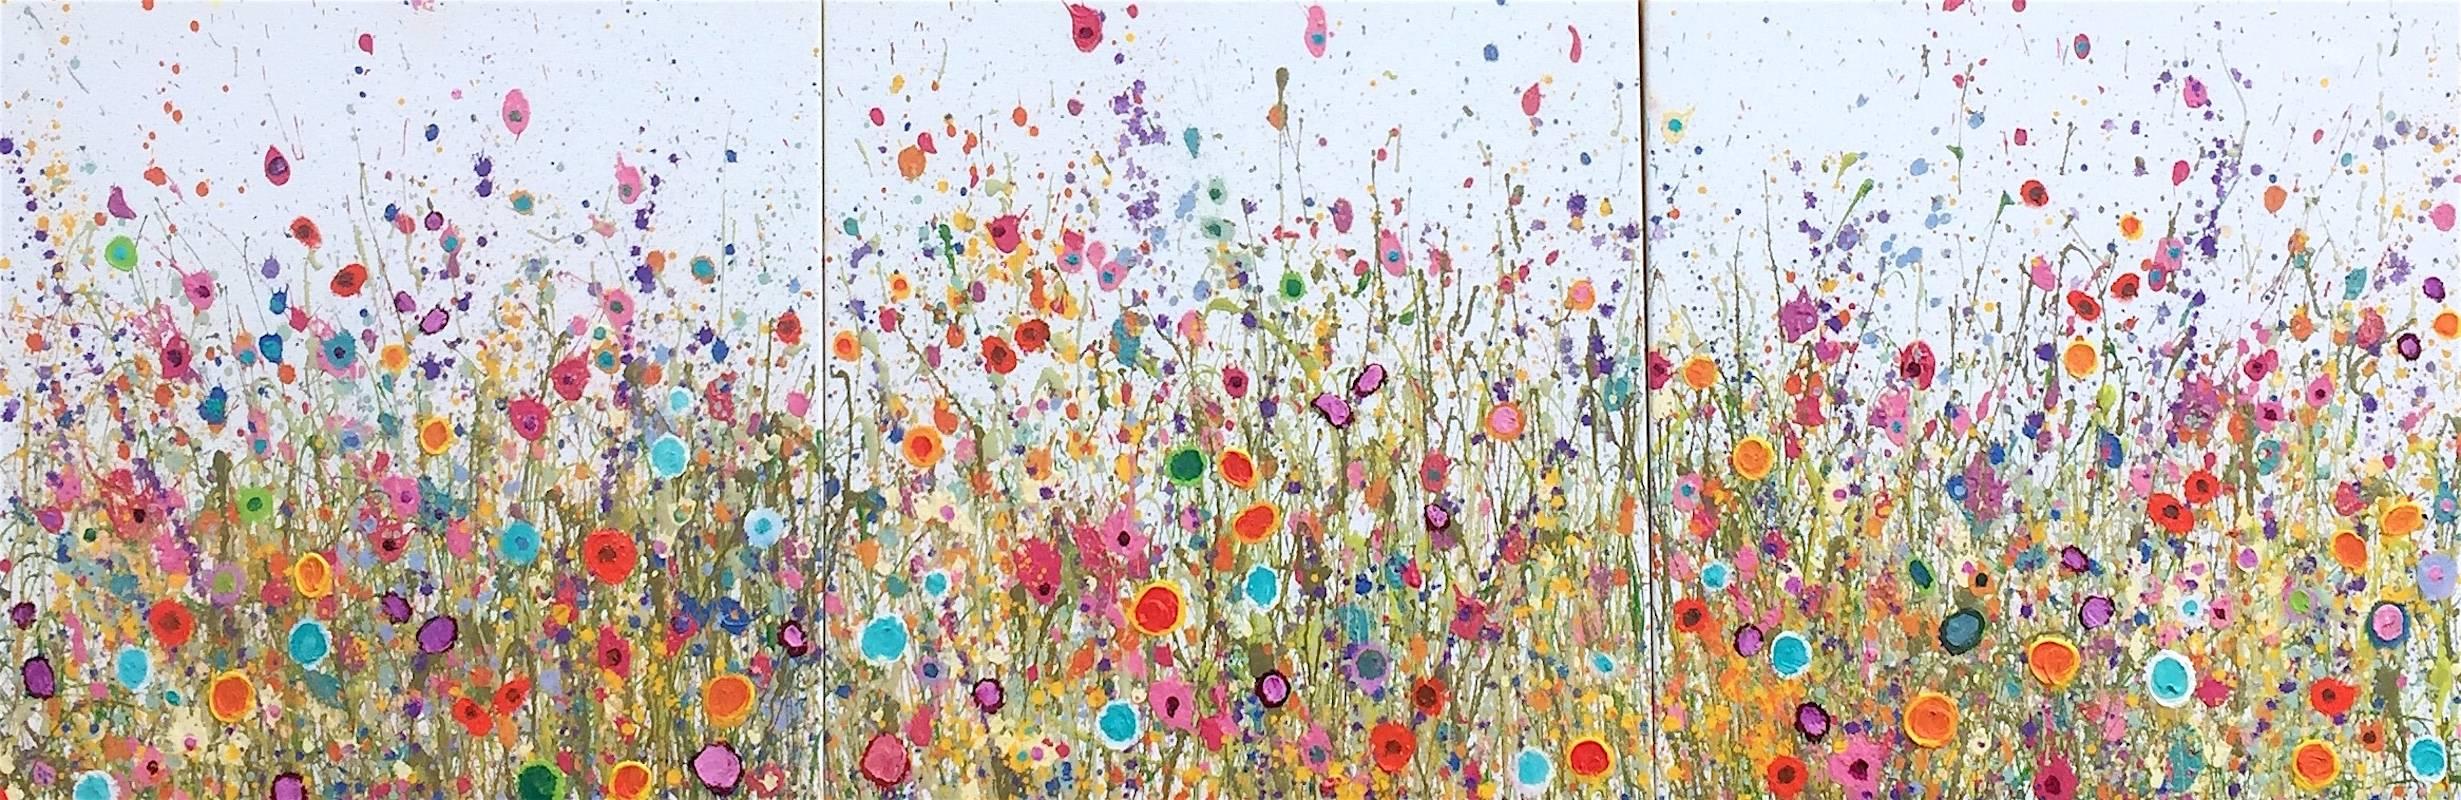 Yvonne Coomber Landscape Painting - My Heart is Yours abstract landscape painting